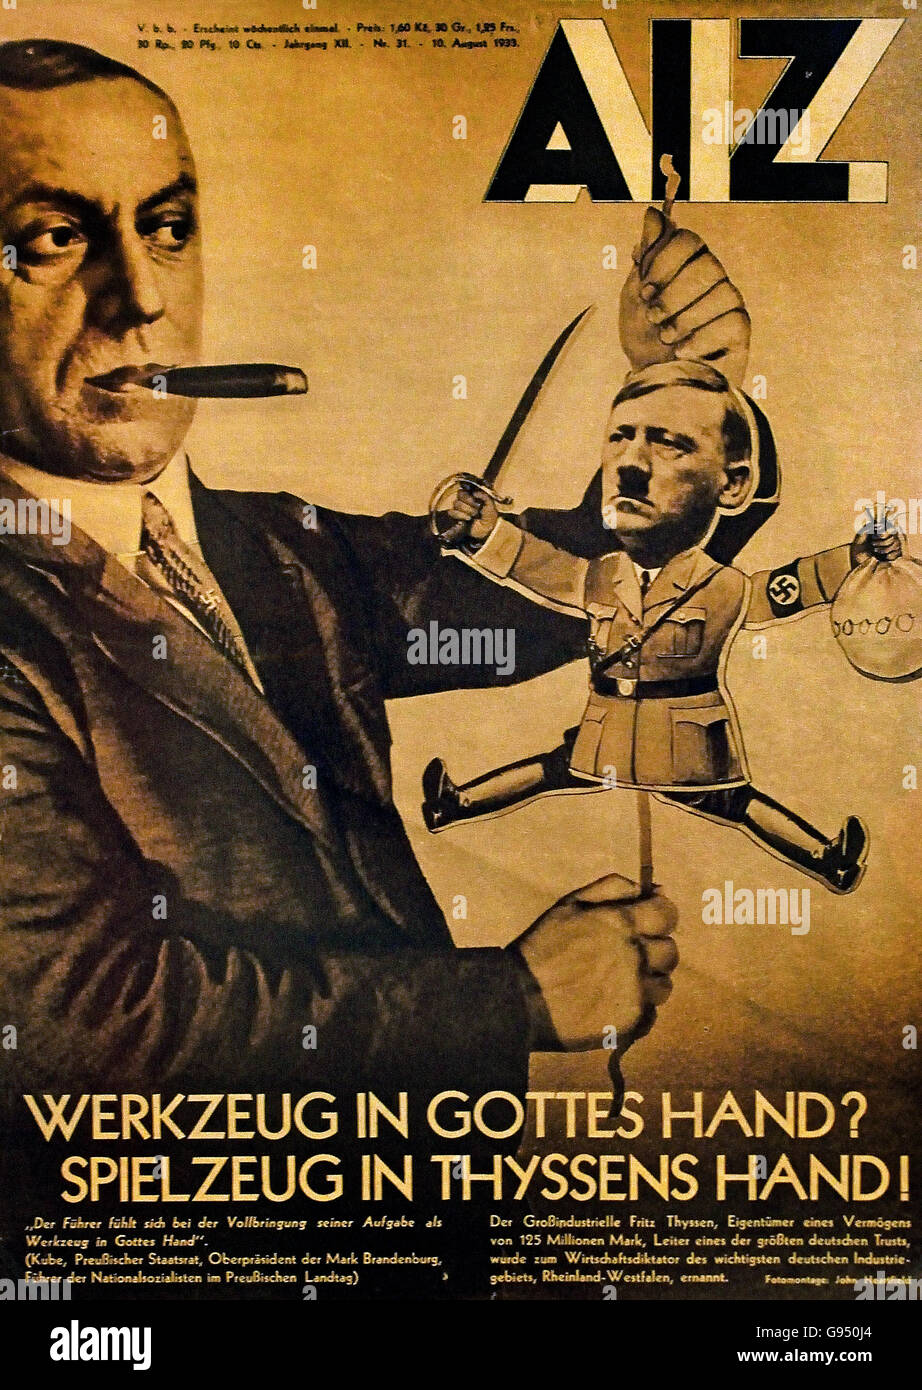 Werkzeug in Gottes Hand spielzeug in Thyssens Hand  - Instrument in God's hand toy in Thyssen's hand   A.I.Z. on the alliance of the Thyssen company with NSDAP Berlin Nazi Germany Stock Photo